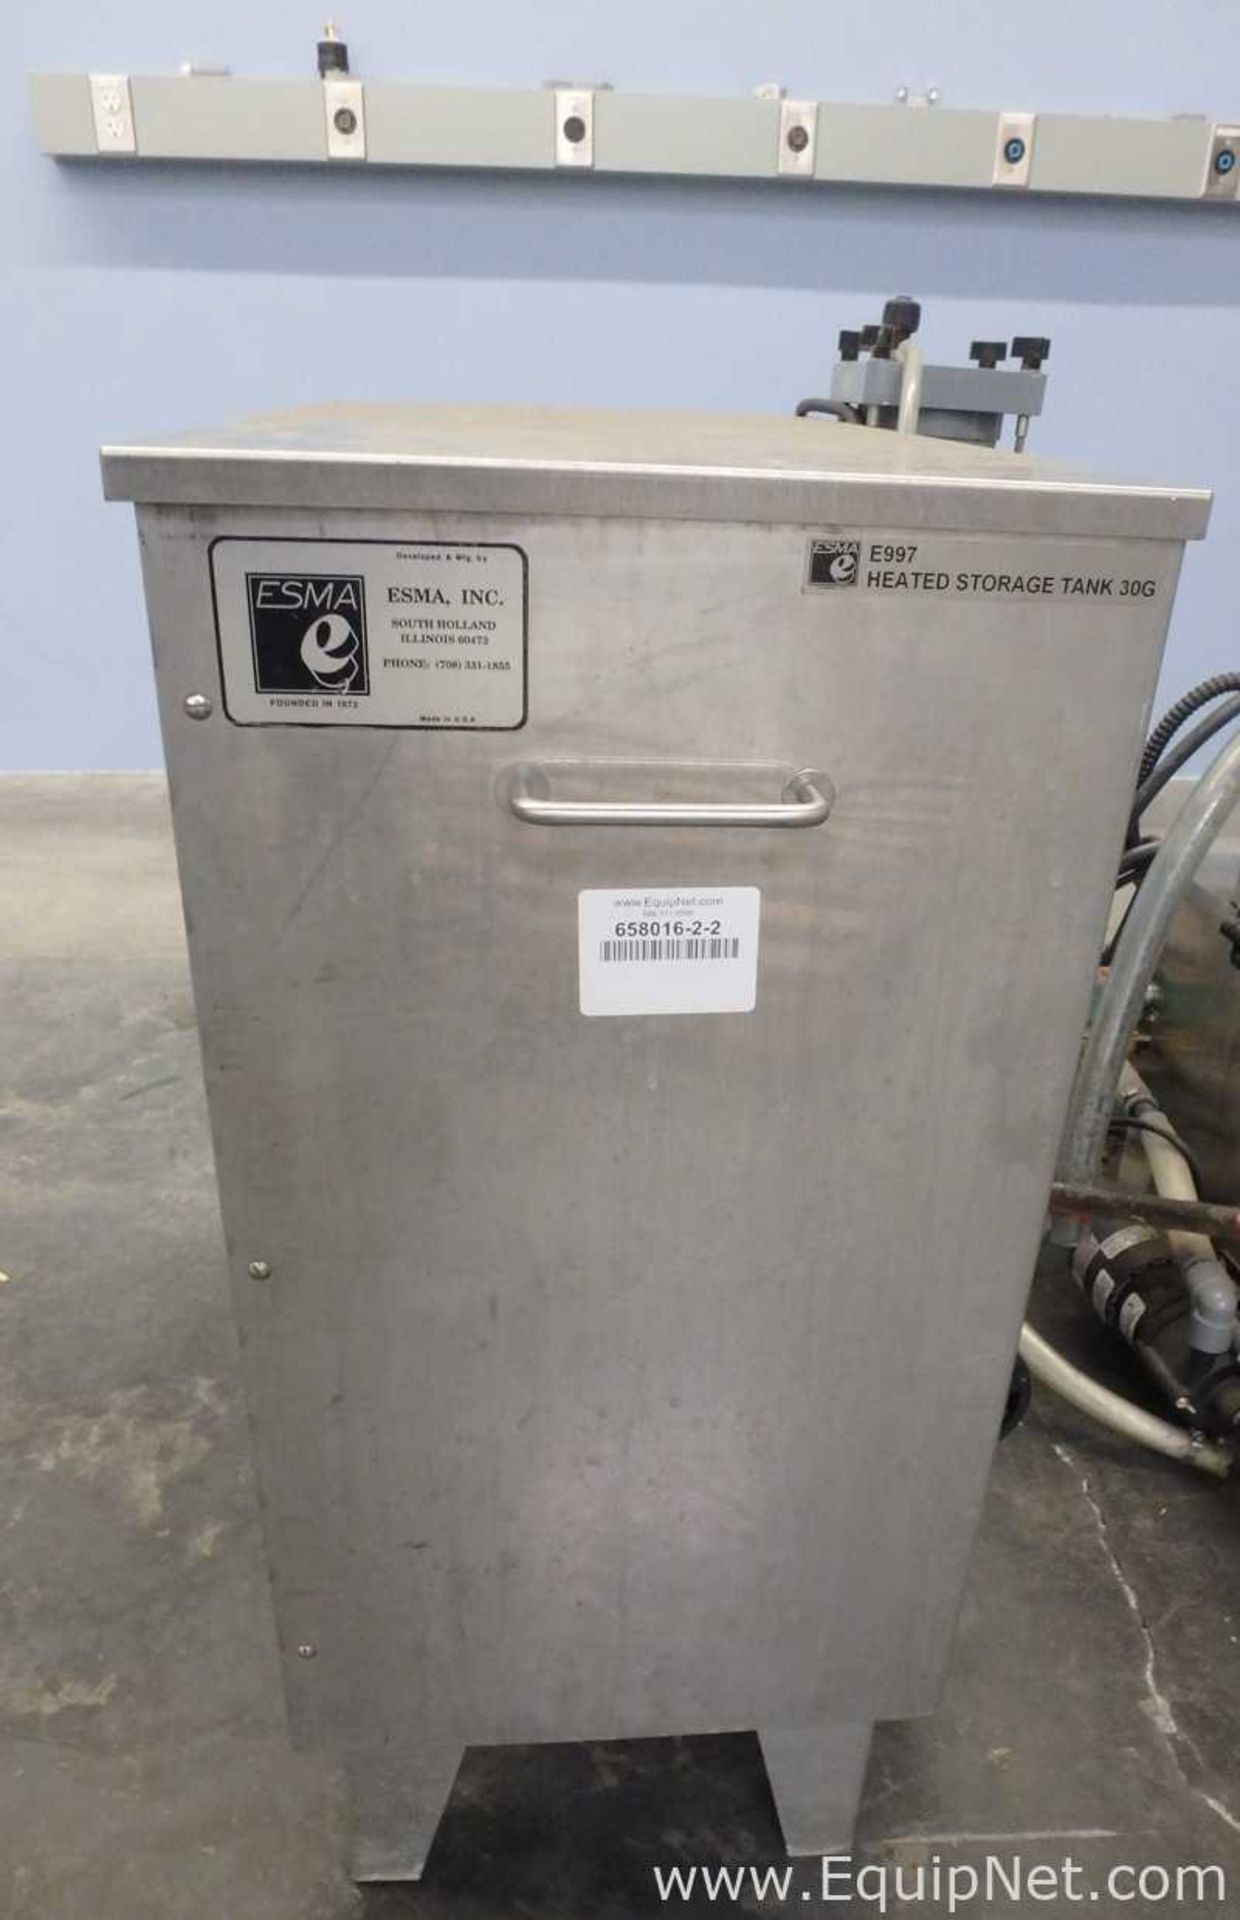 ESMA Inc. E700 Ultrasonic Cleaning System with E997 30Gal Heated Storage Tank - Image 25 of 38